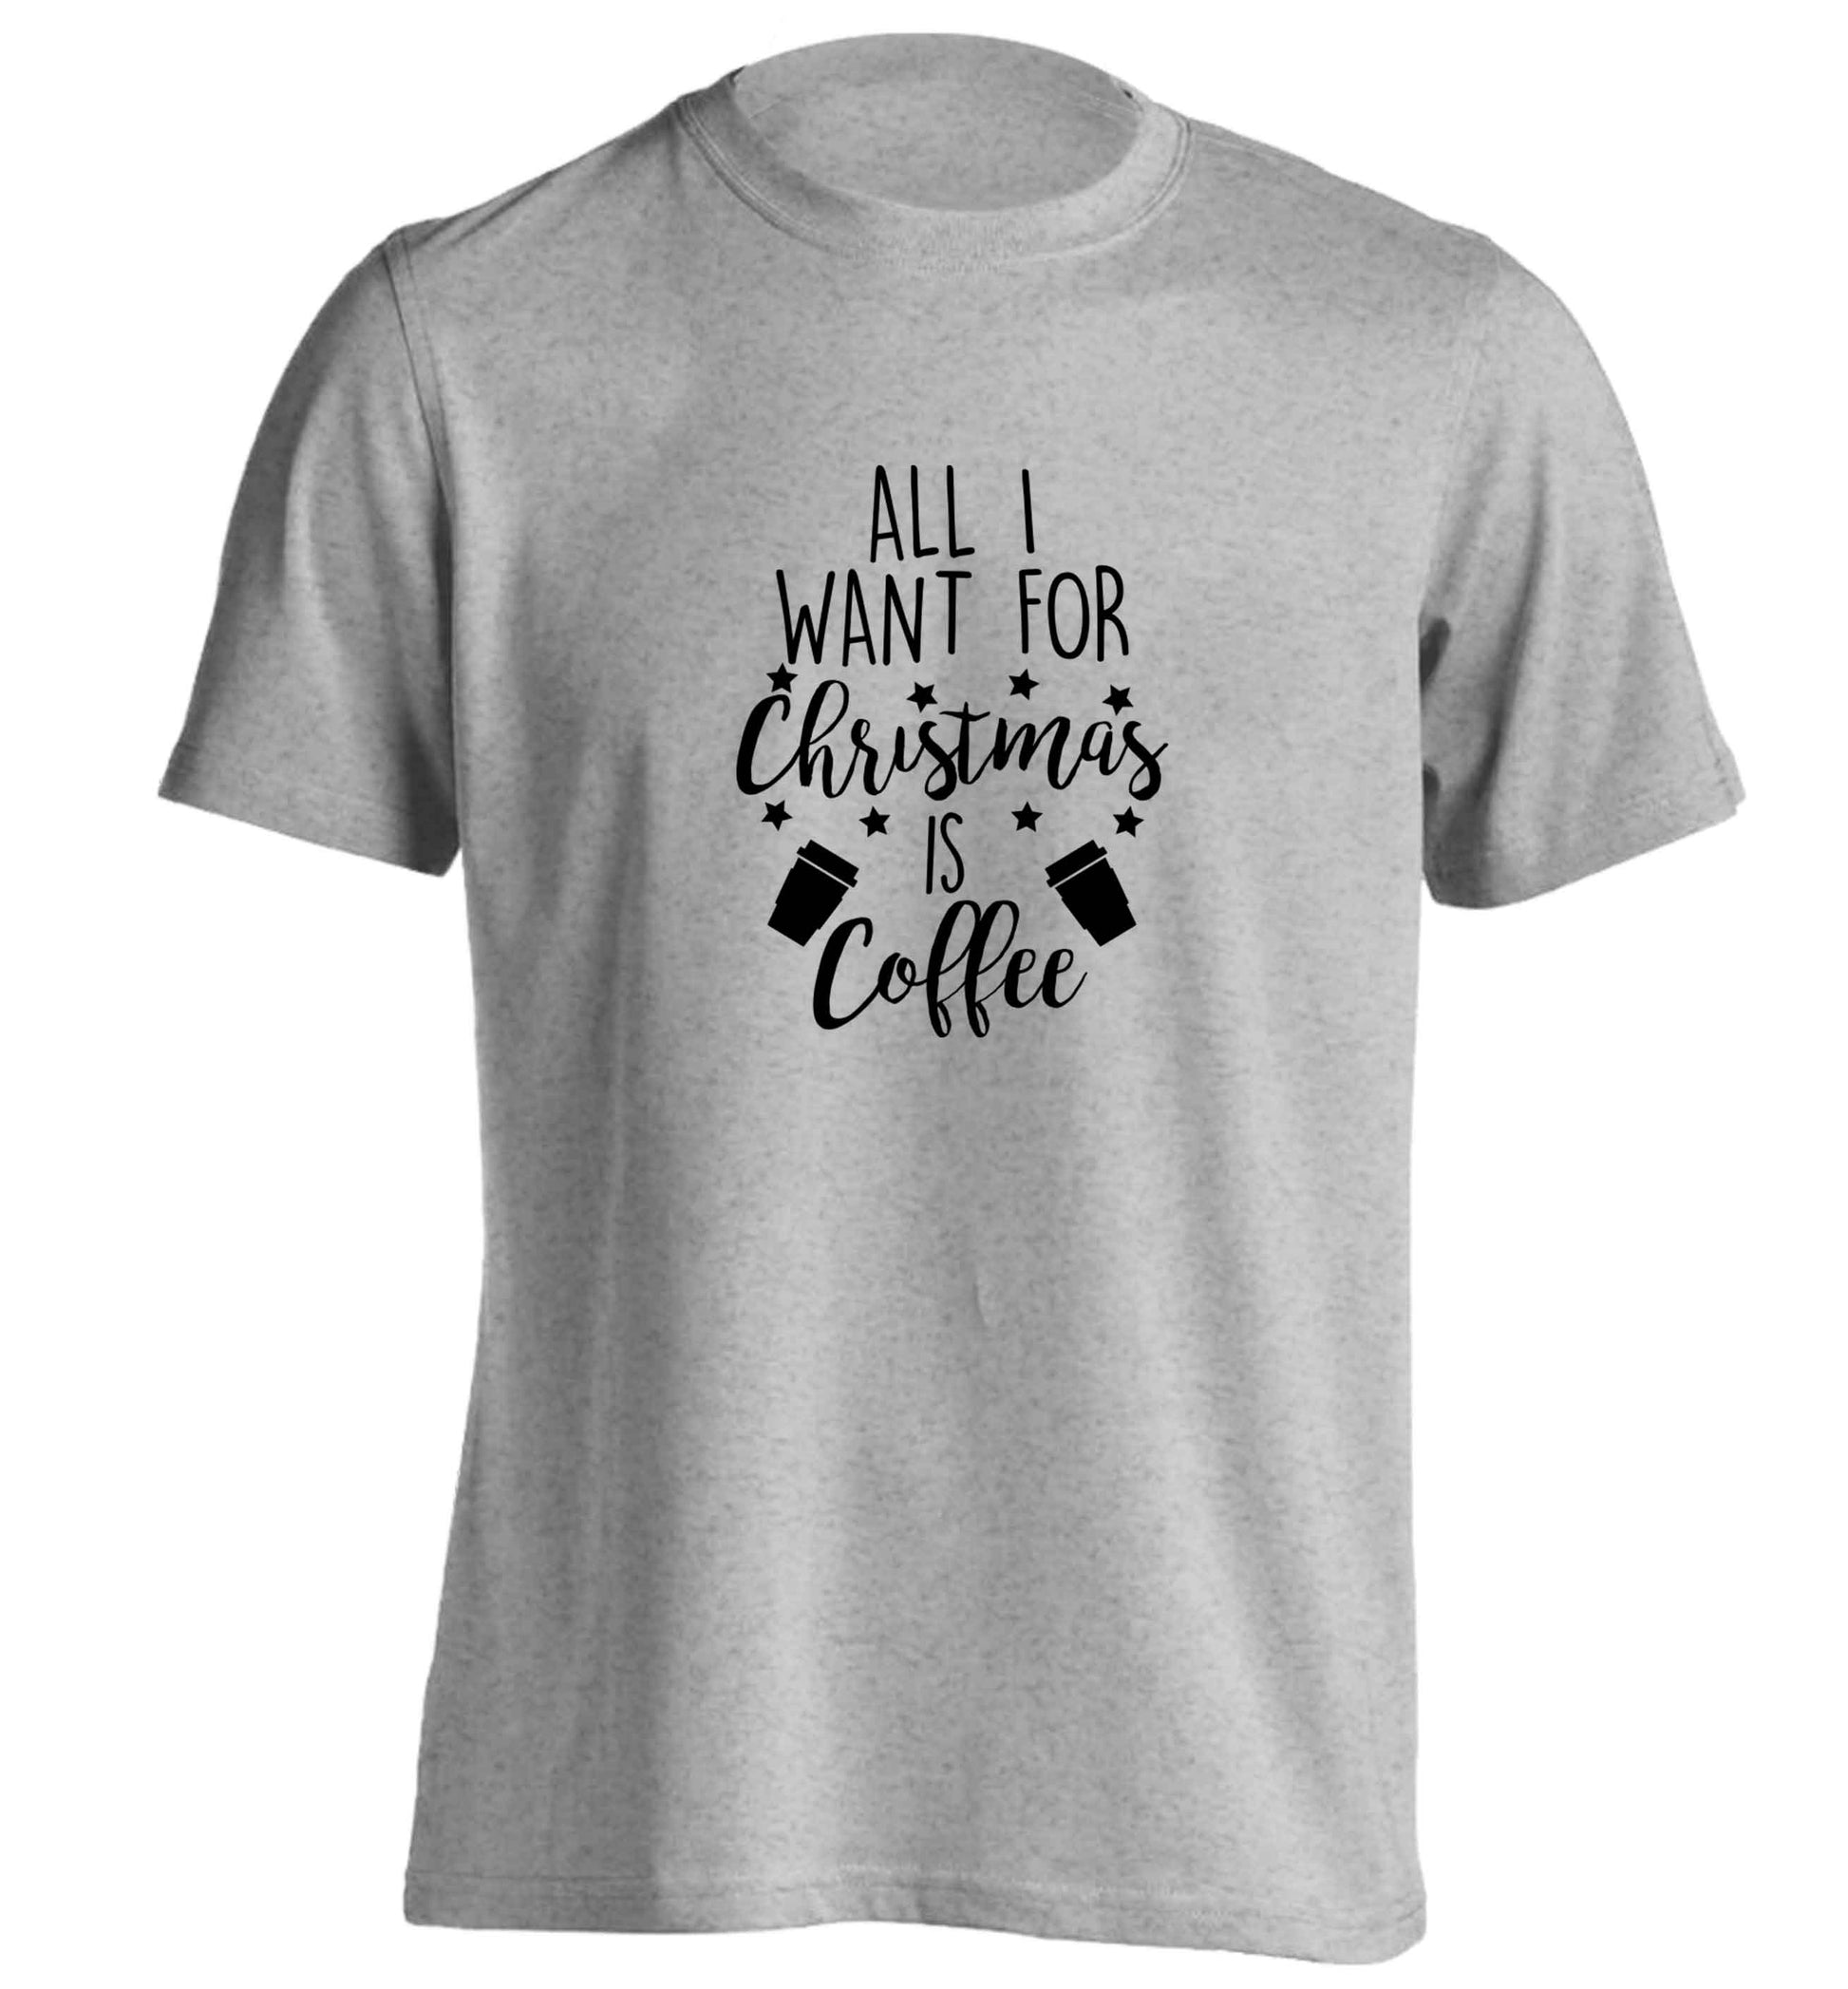 All I want for Christmas is coffee adults unisex grey Tshirt 2XL